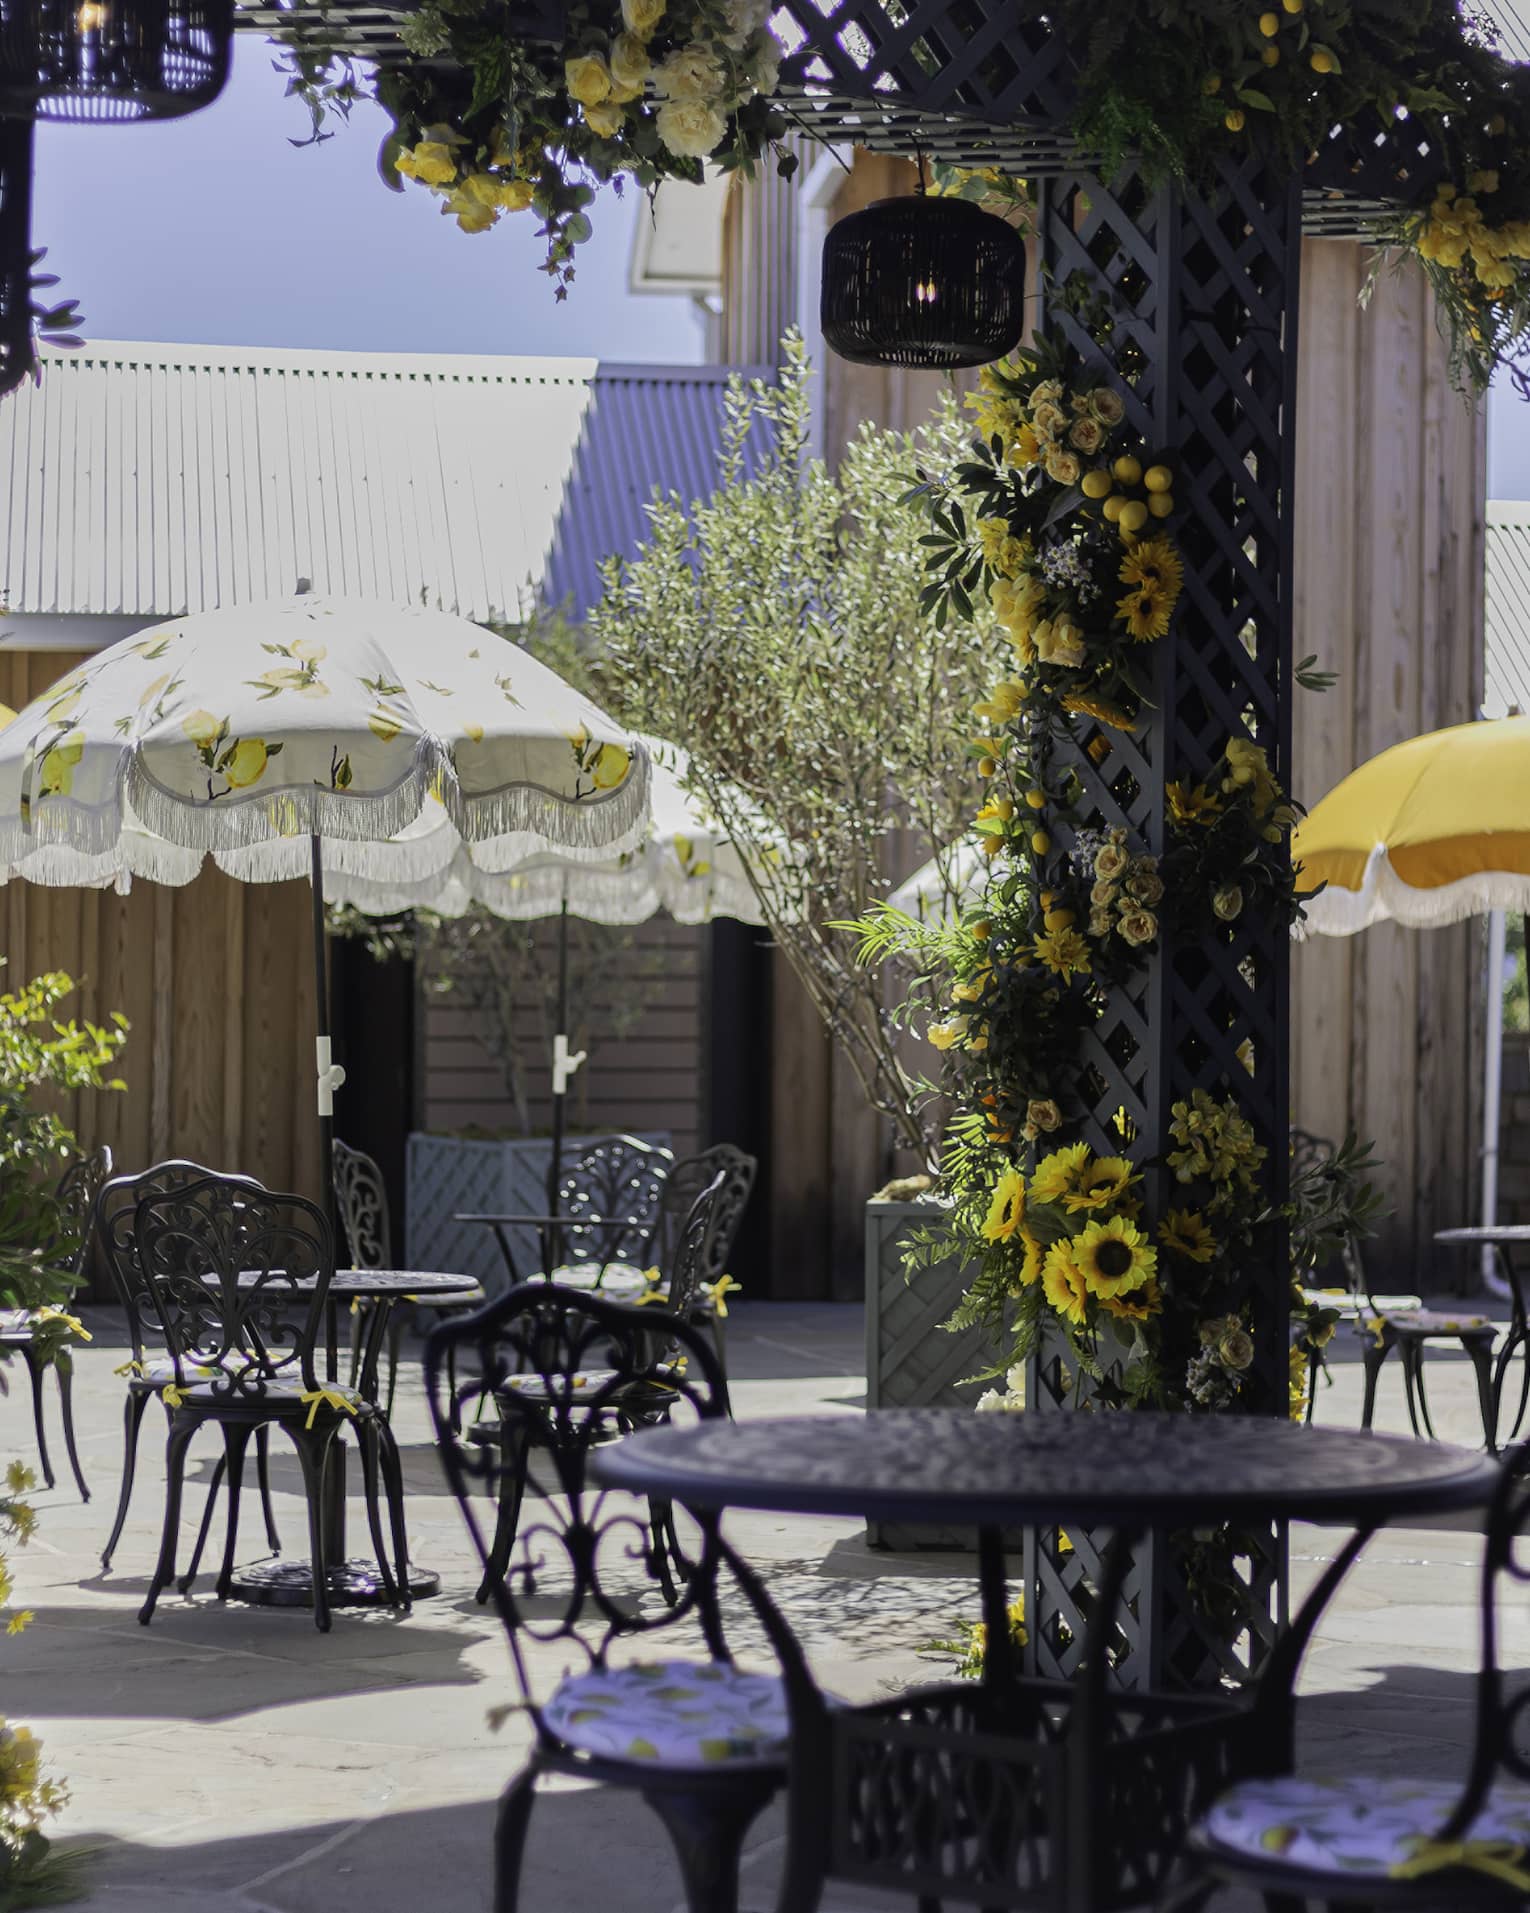 The Amalfi Garden with yellow flowers and tables and chairs with umbrellas.